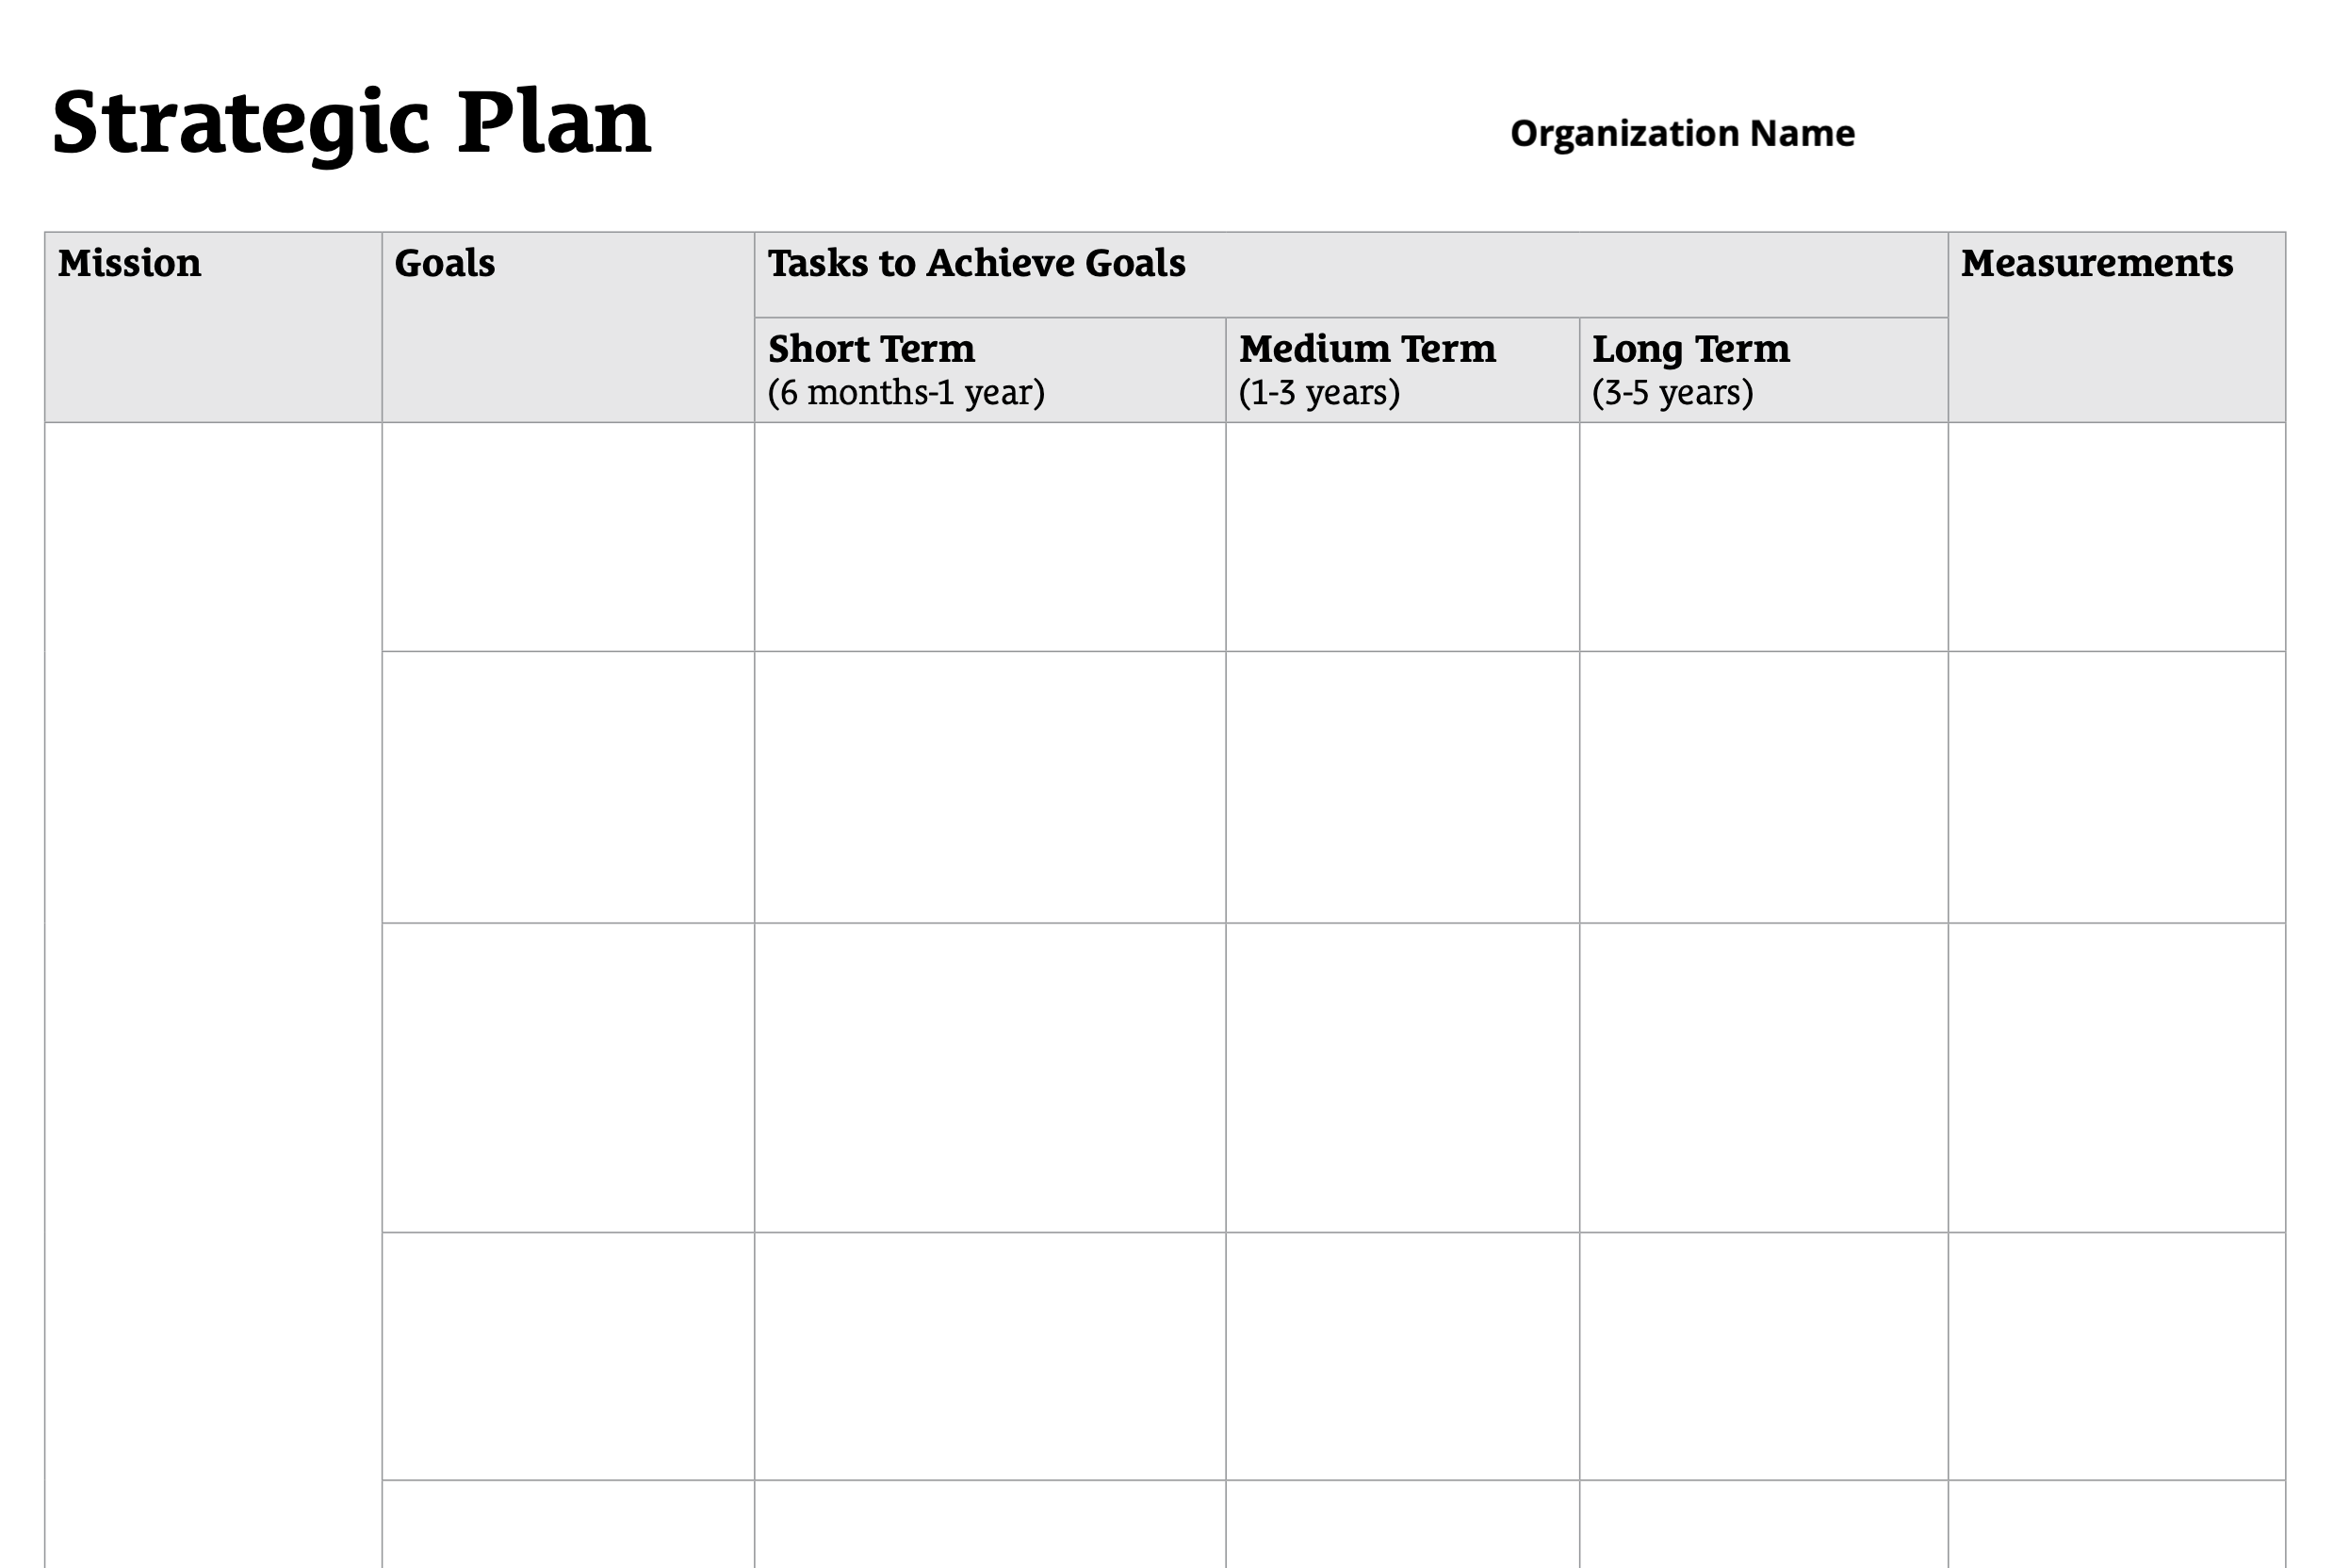 A tiny thumbnail image of the fillable template for your strategic plan.